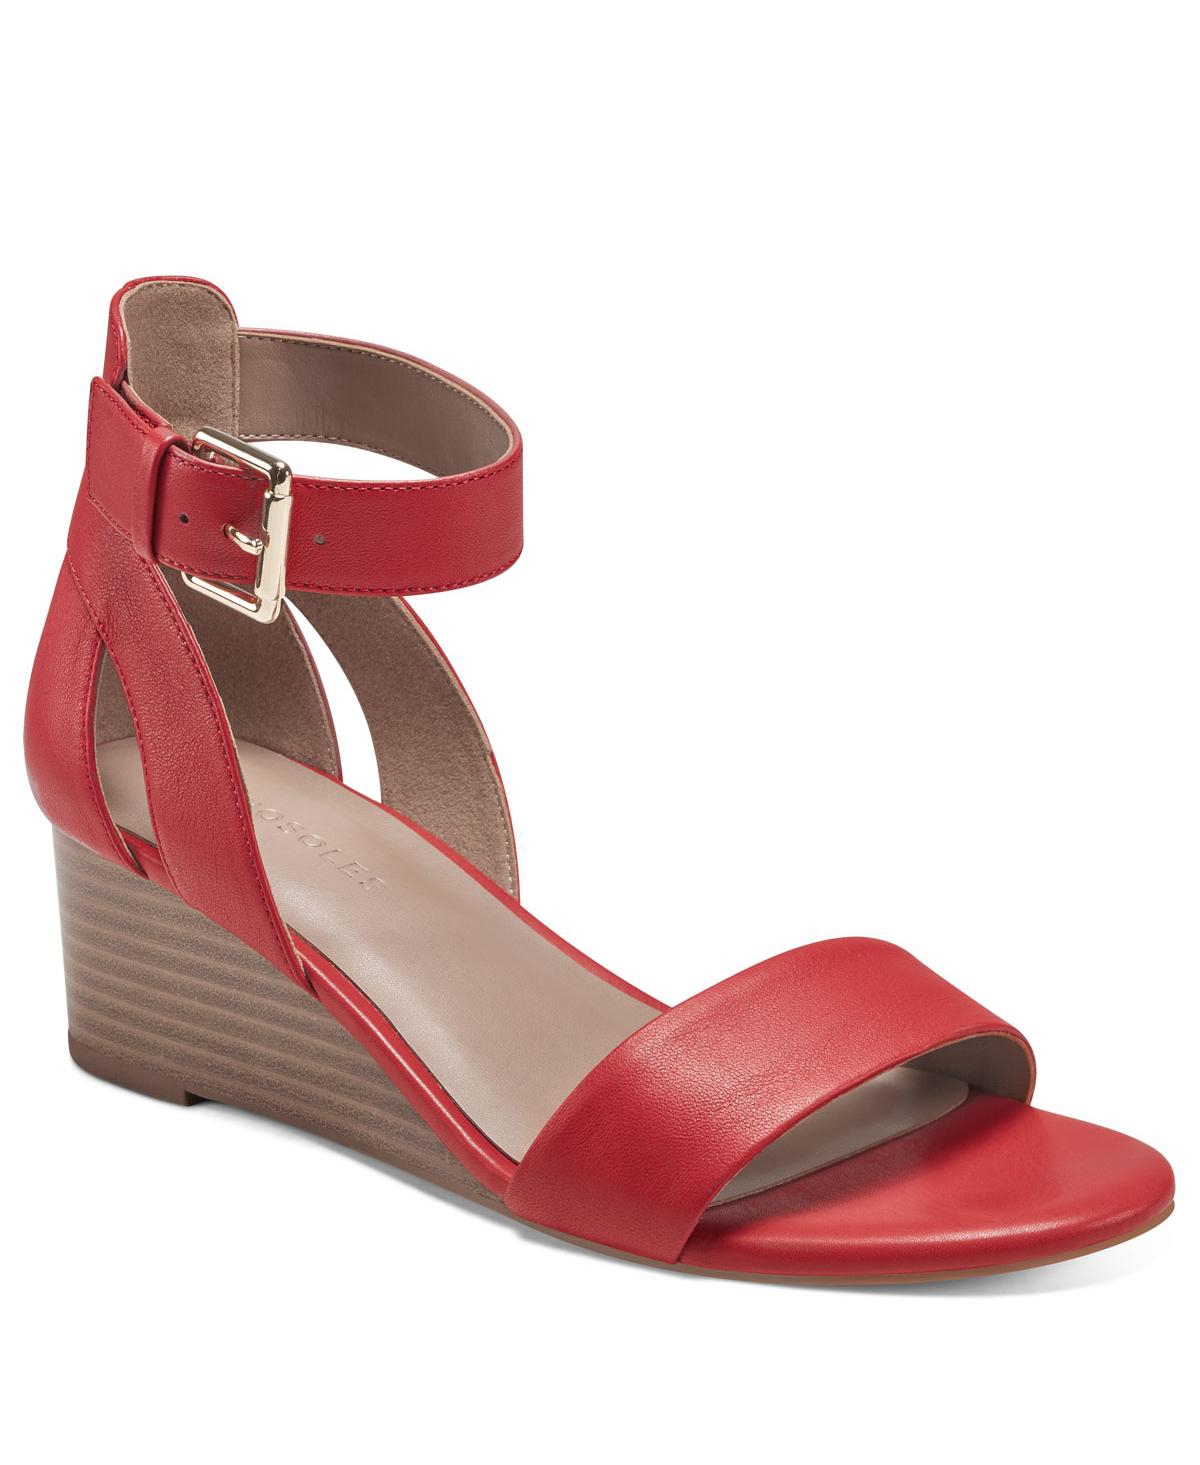 Aerosoles Willowbrook Wedge Sandals In Red Genuine Leather